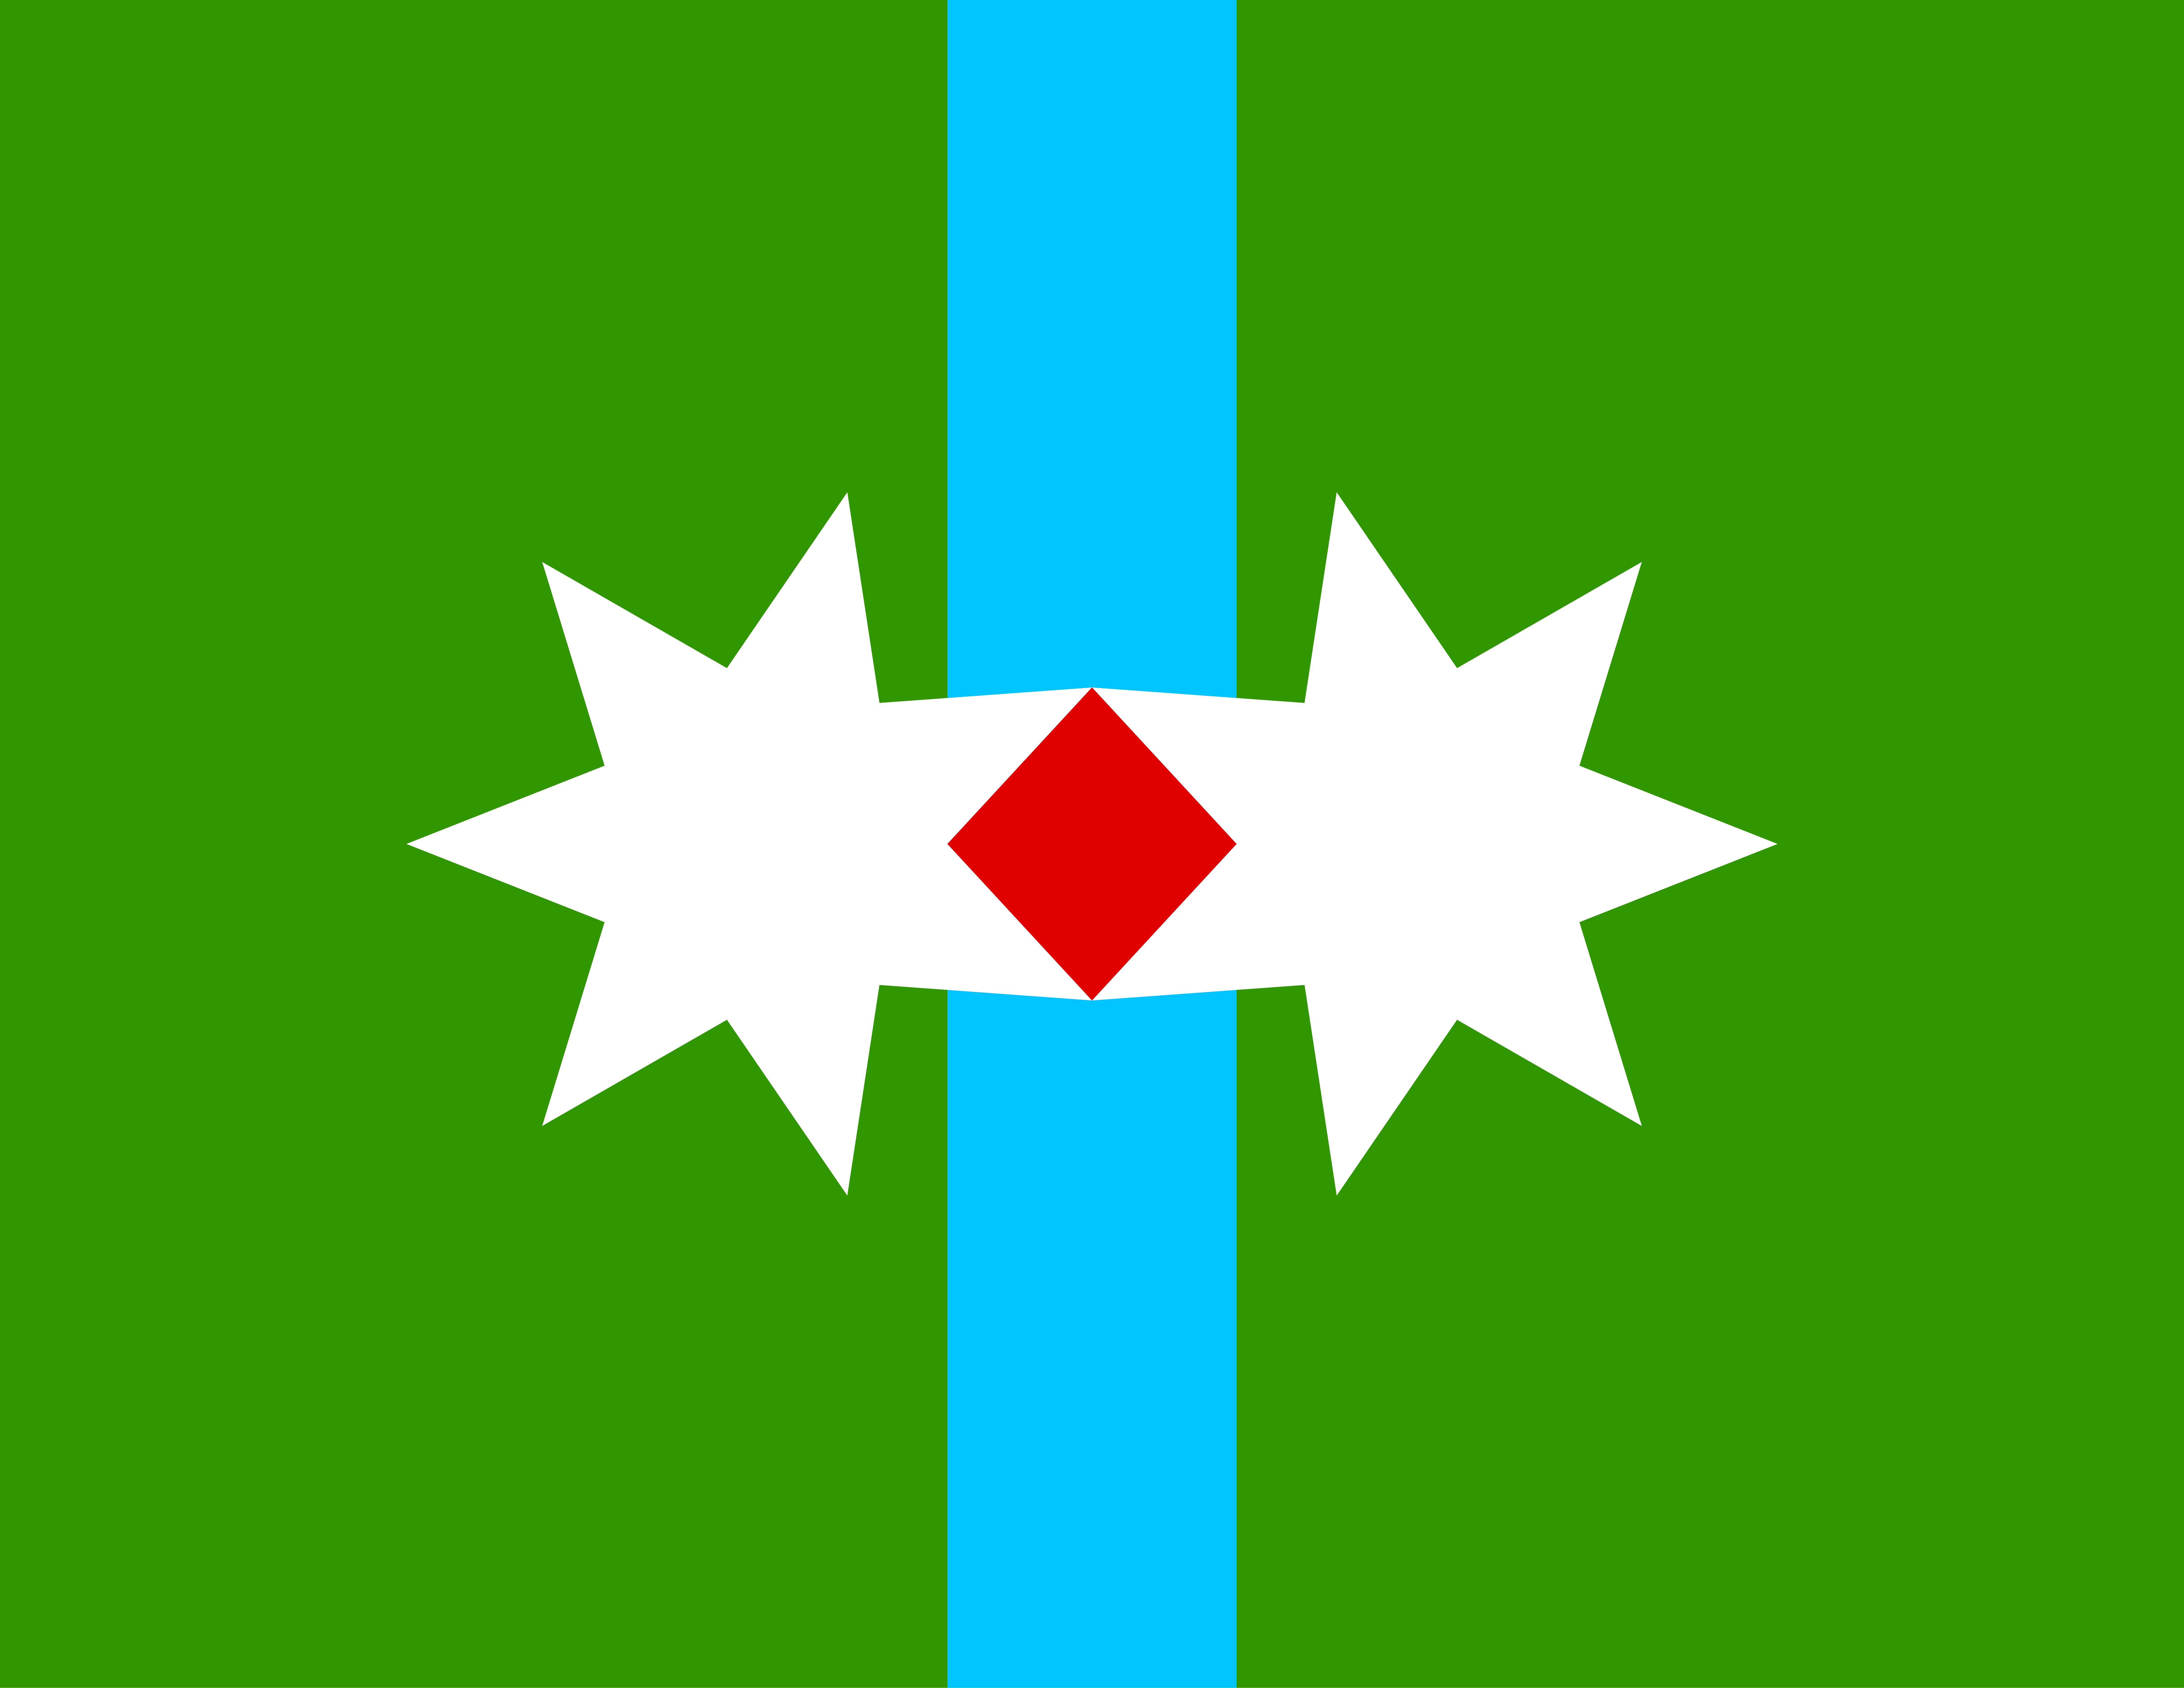 The flag of the Seicreth Alliance. It has a forest green background with a cyan stripe going down the center. The central element is two seven-pointed stars that resemble wolves touching at two points, with the area between them forming a small red diamond.